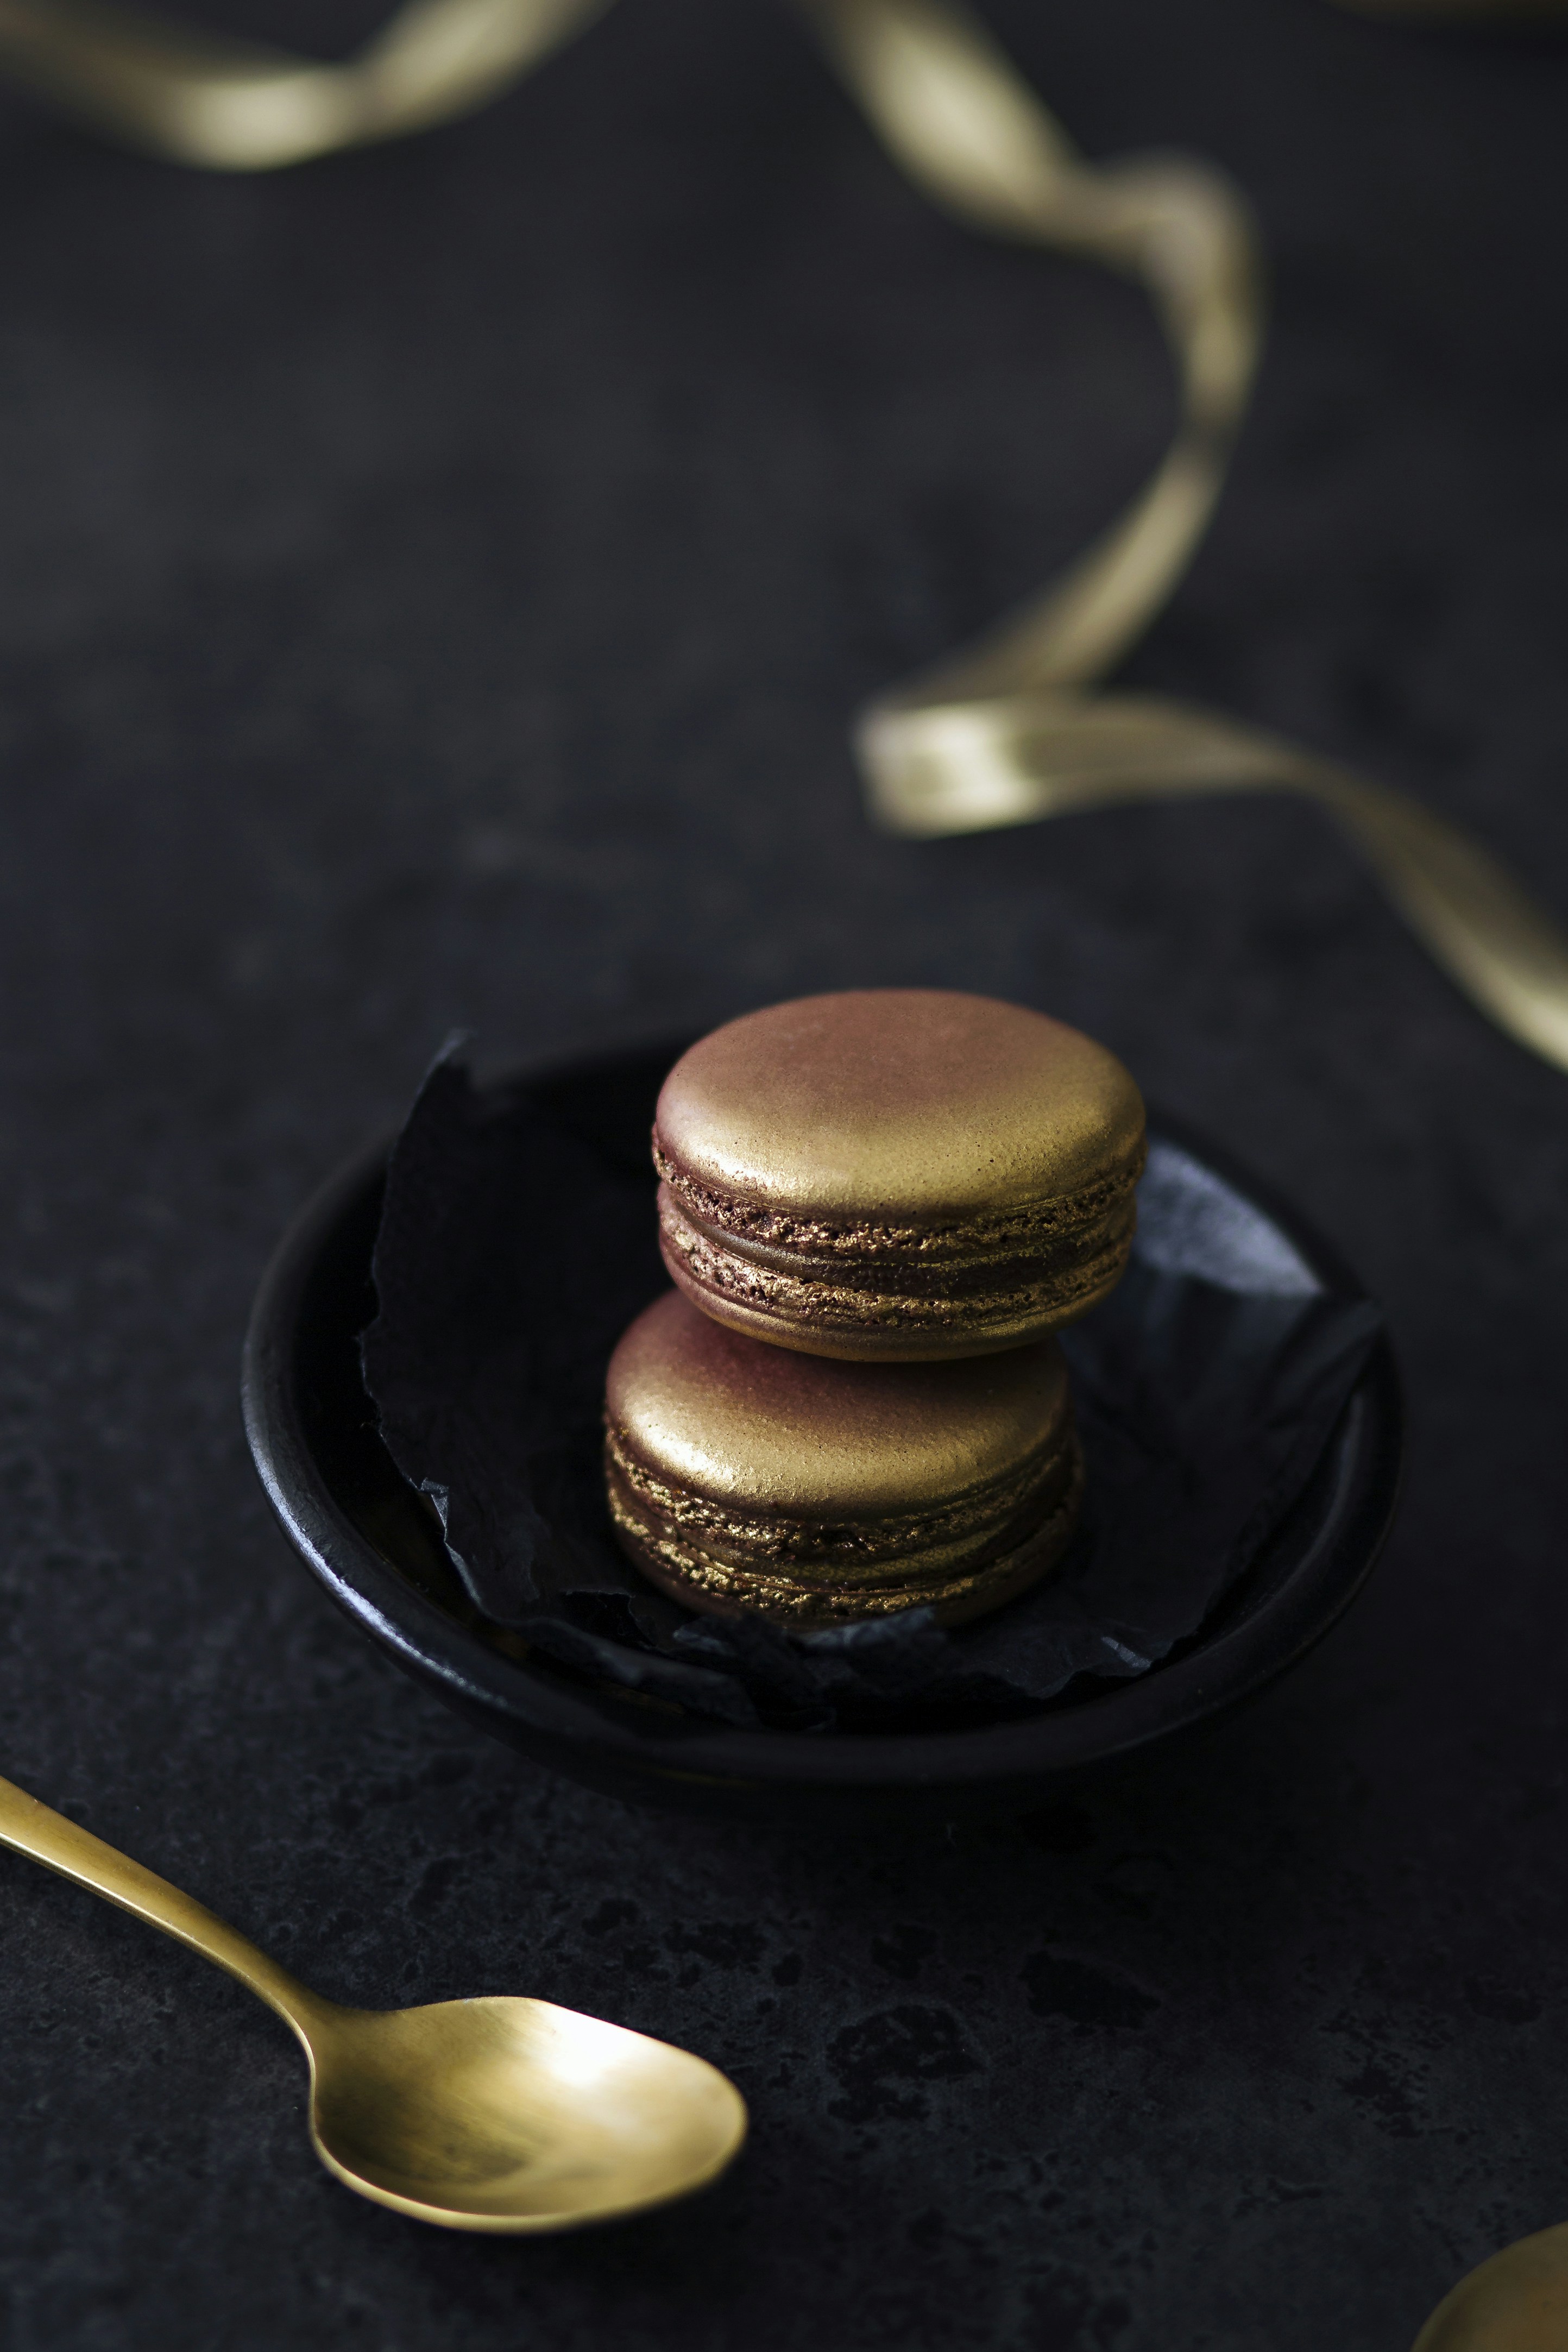 I stumbled upon these gold macarons and had to photograph them. Glam food at its finest! Also playing with monochromatic colours.